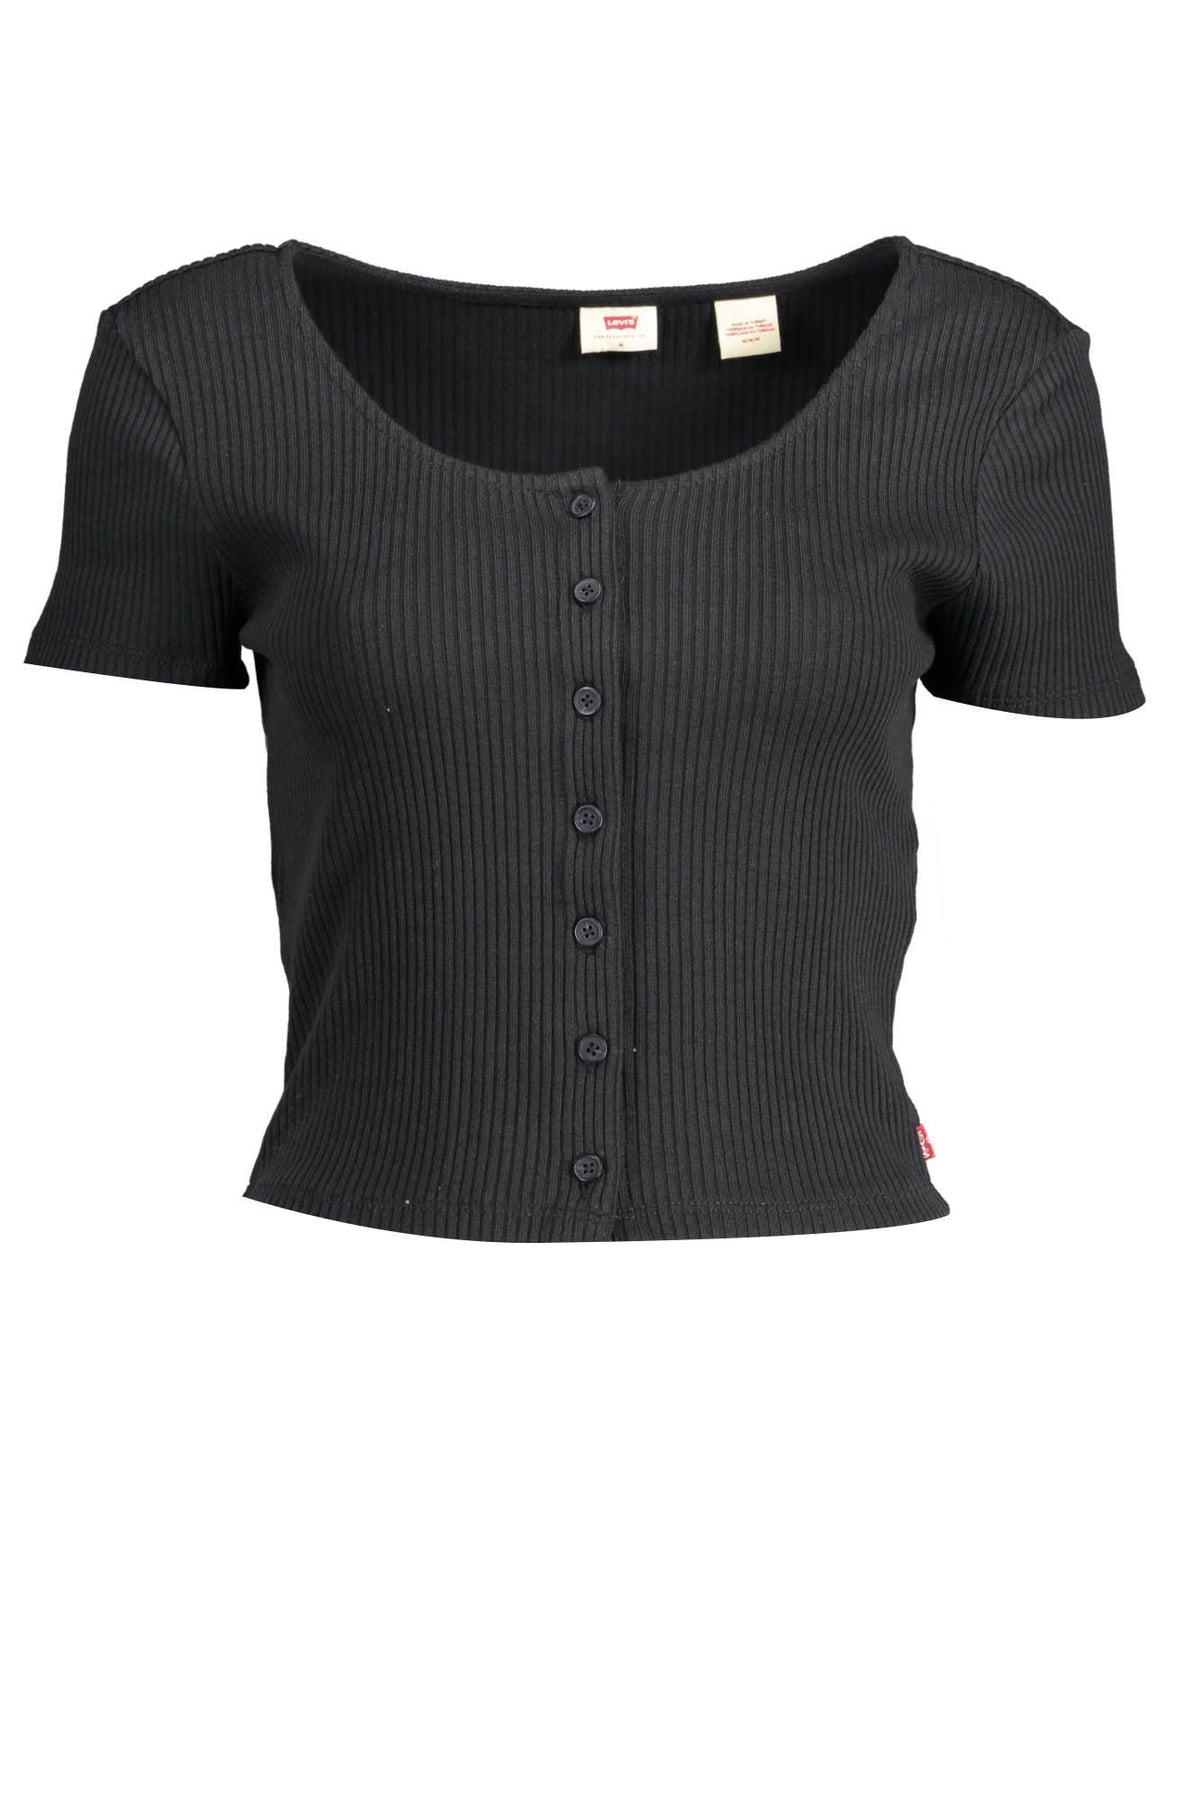 Levi's Chic Black Cotton Tee with Button Detail